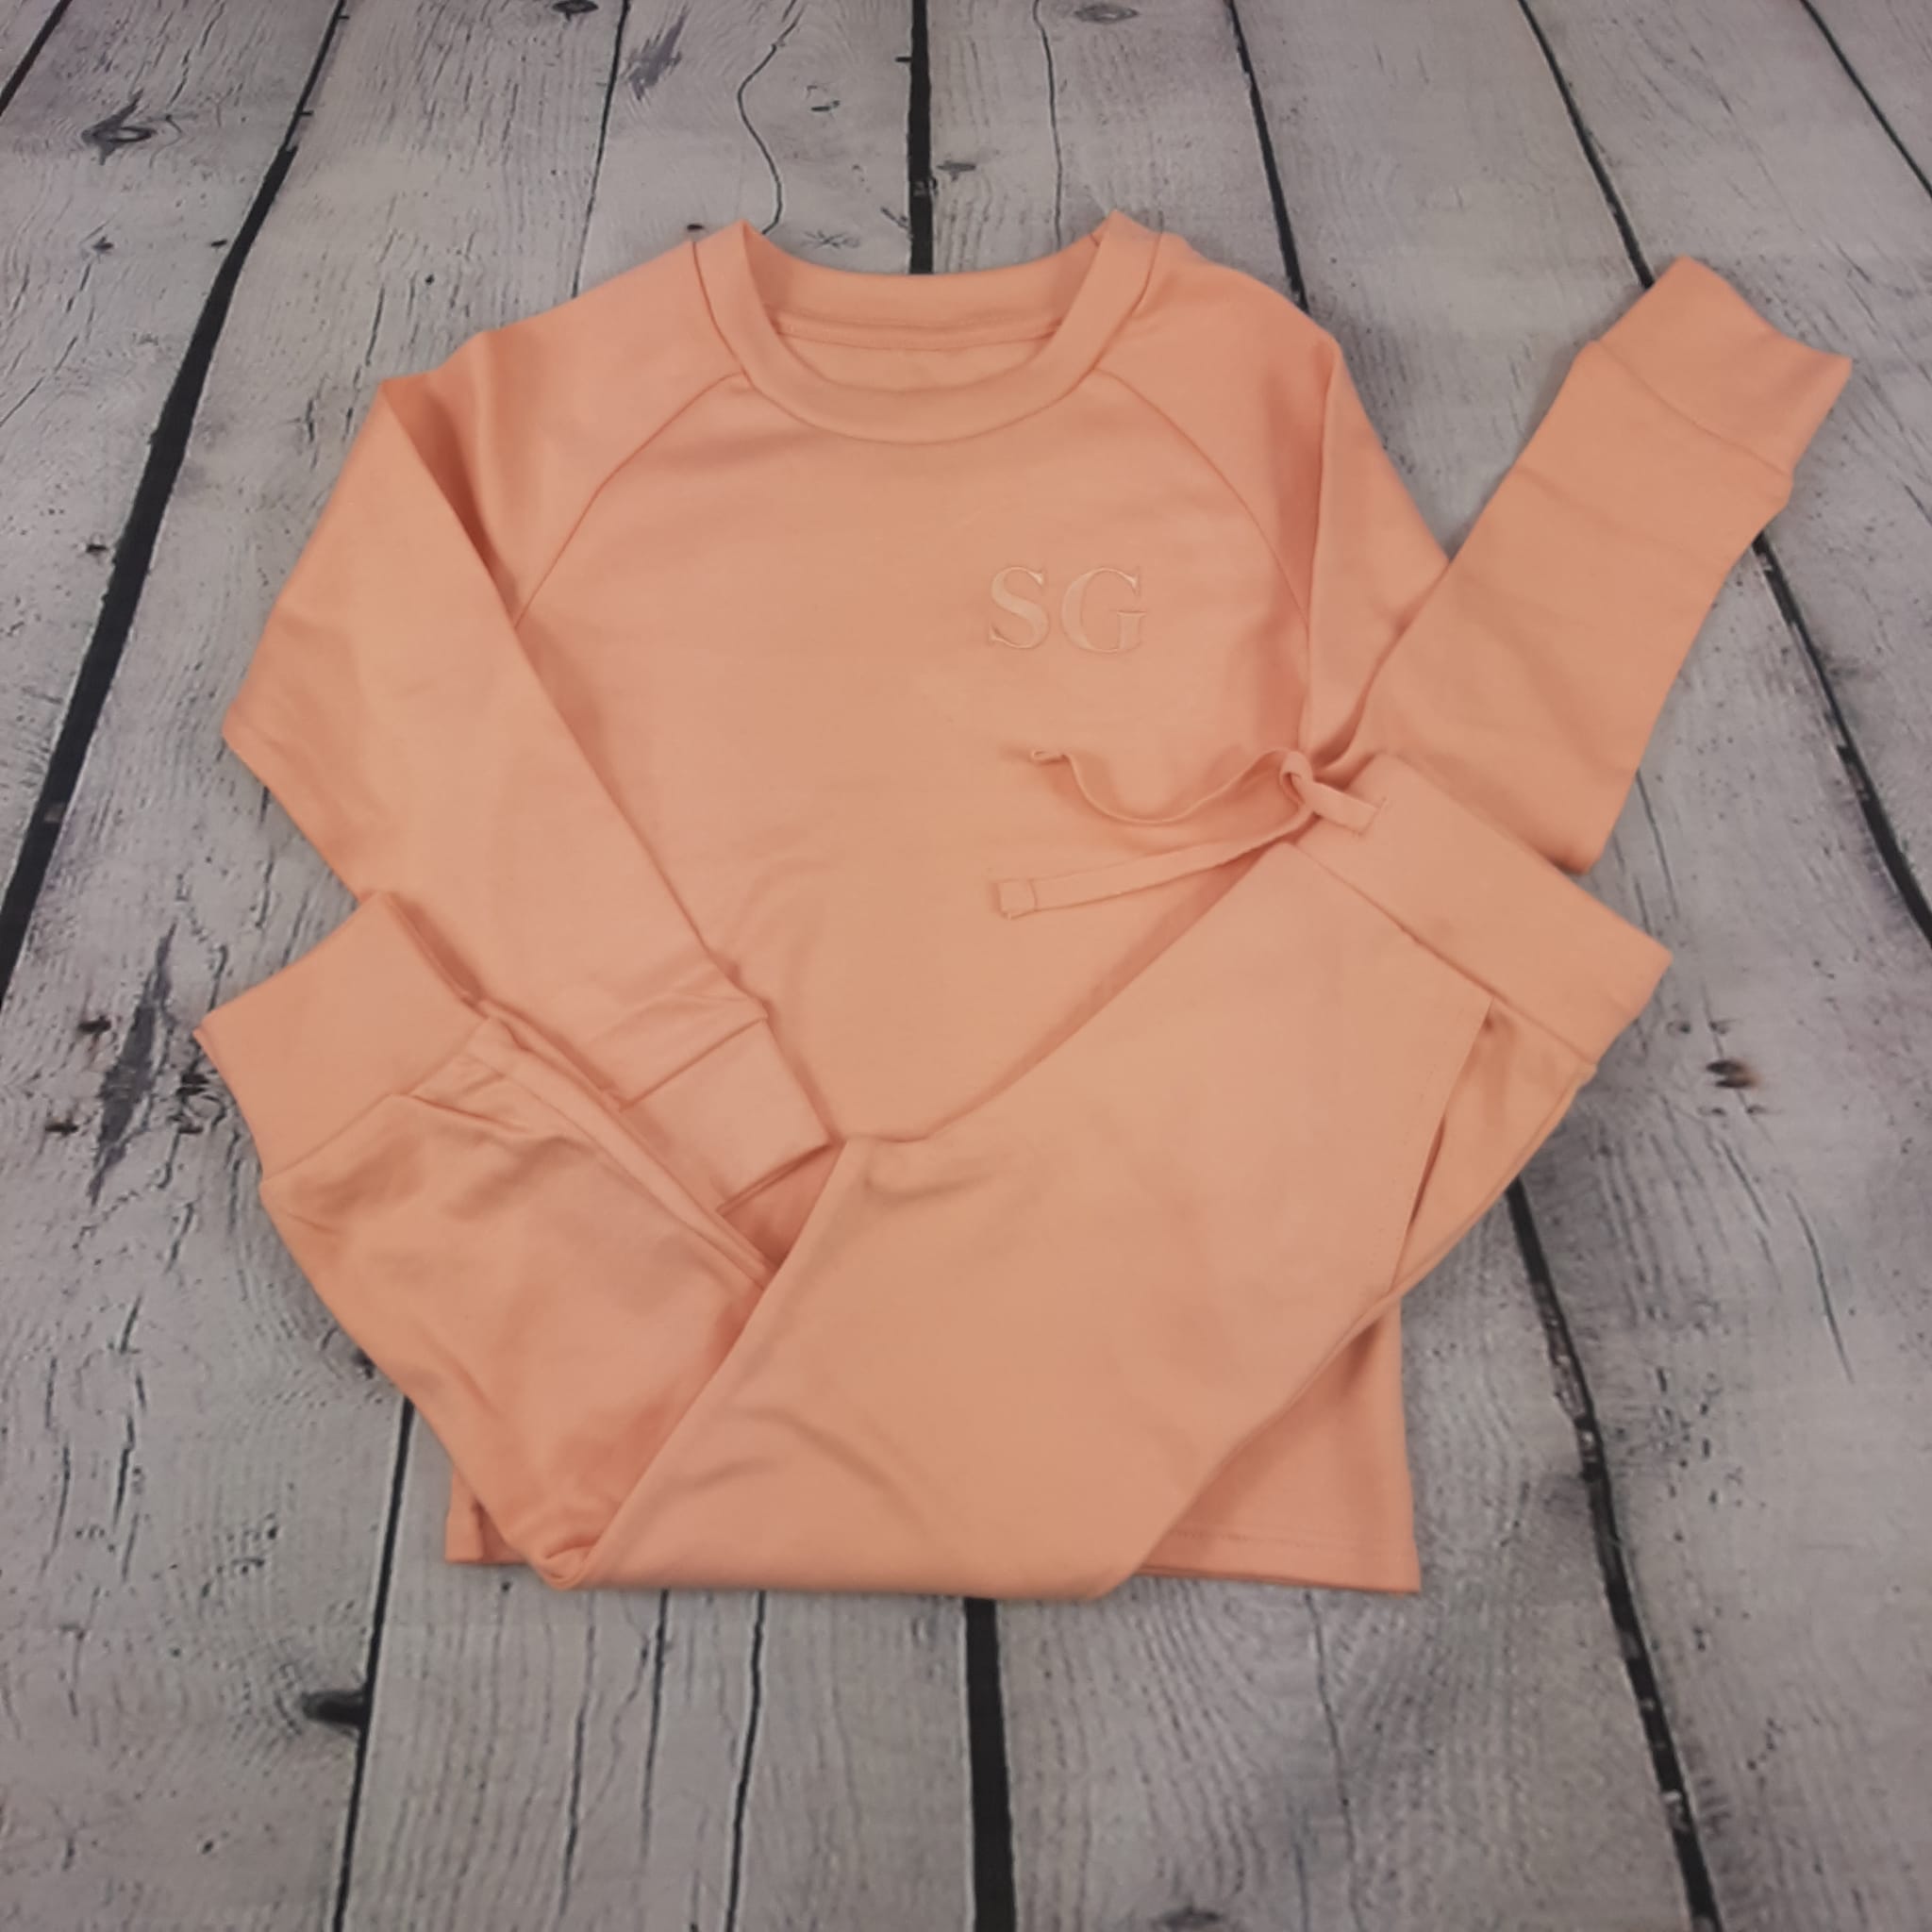 dusky pink childrens loungewear set with matching embroidered initials